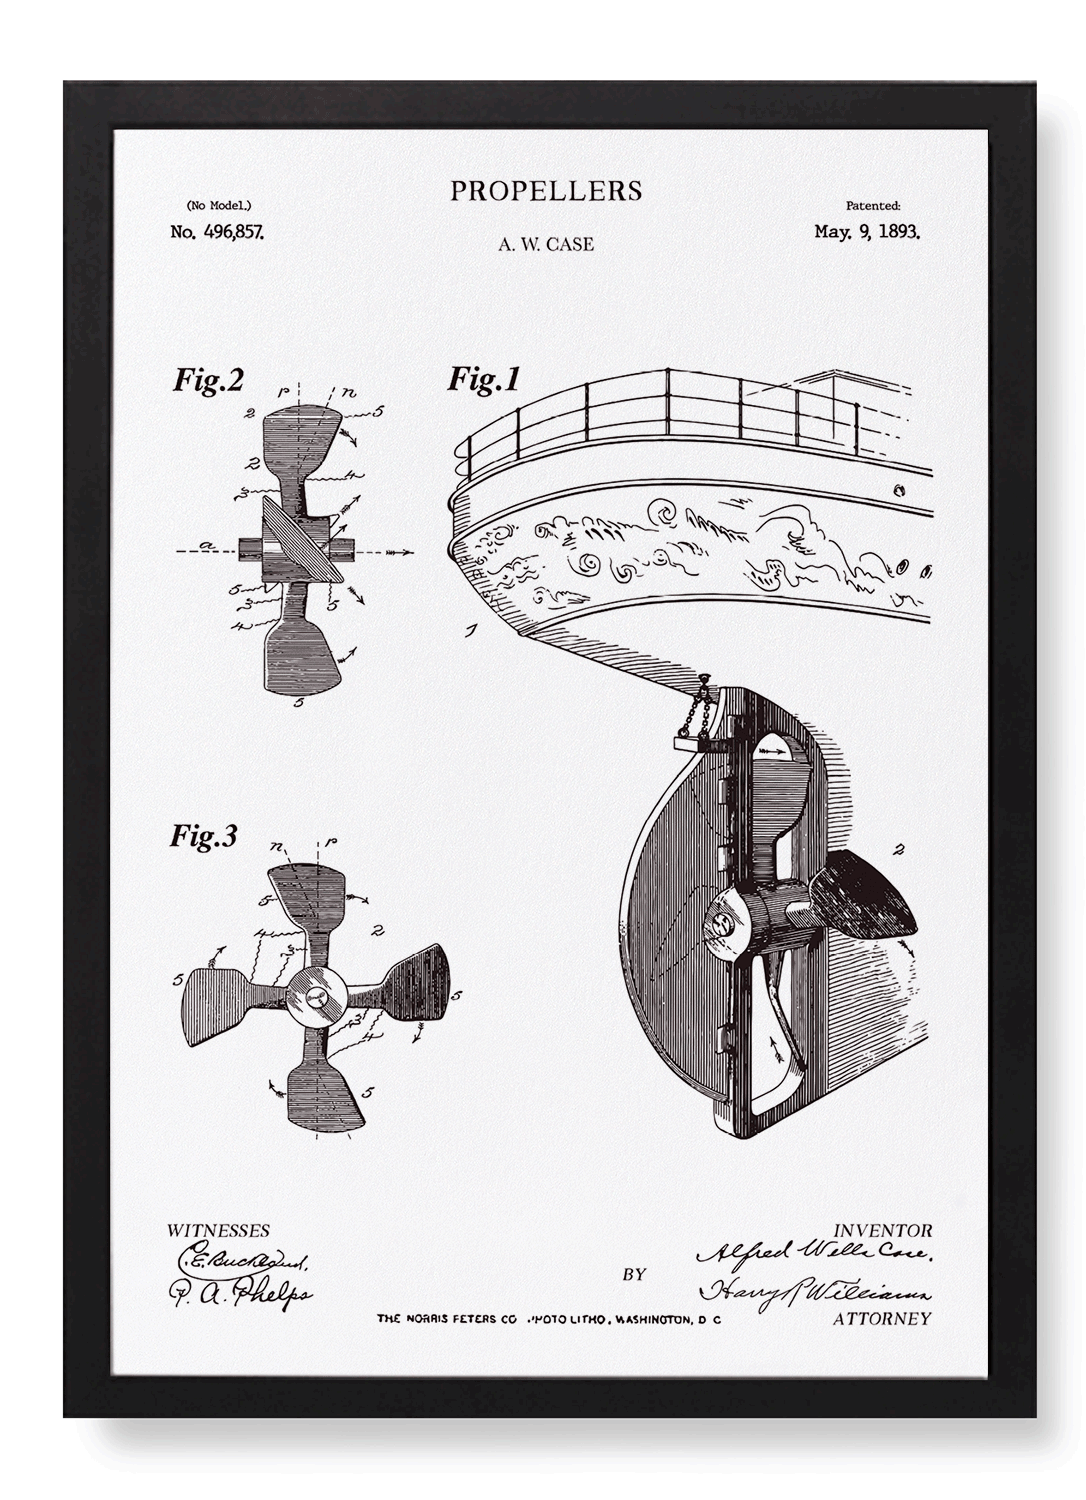 PATENT OF PROPELLERS (1893)